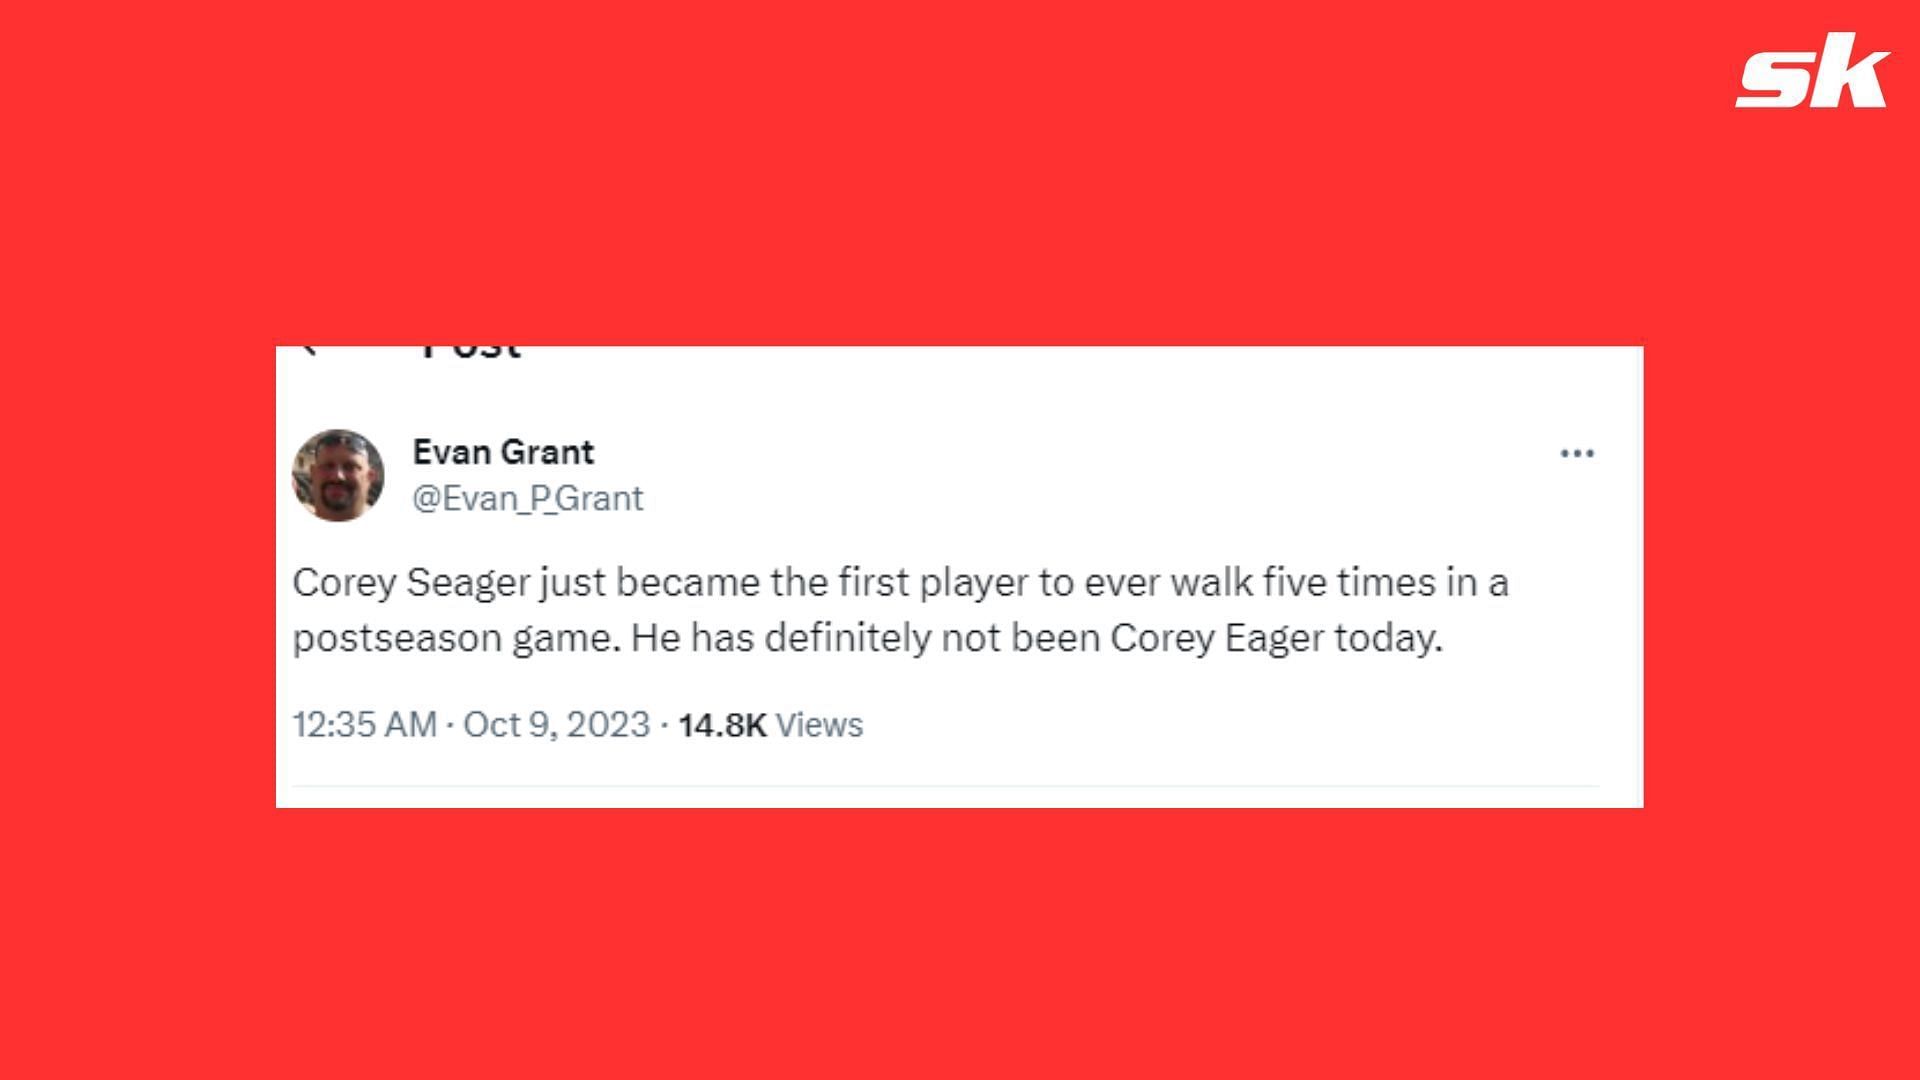 &quot;Corey Seager just became the first player to ever walk five times in a postseason game. He has definitely not been Corey Eager today&quot; - Evan Grant